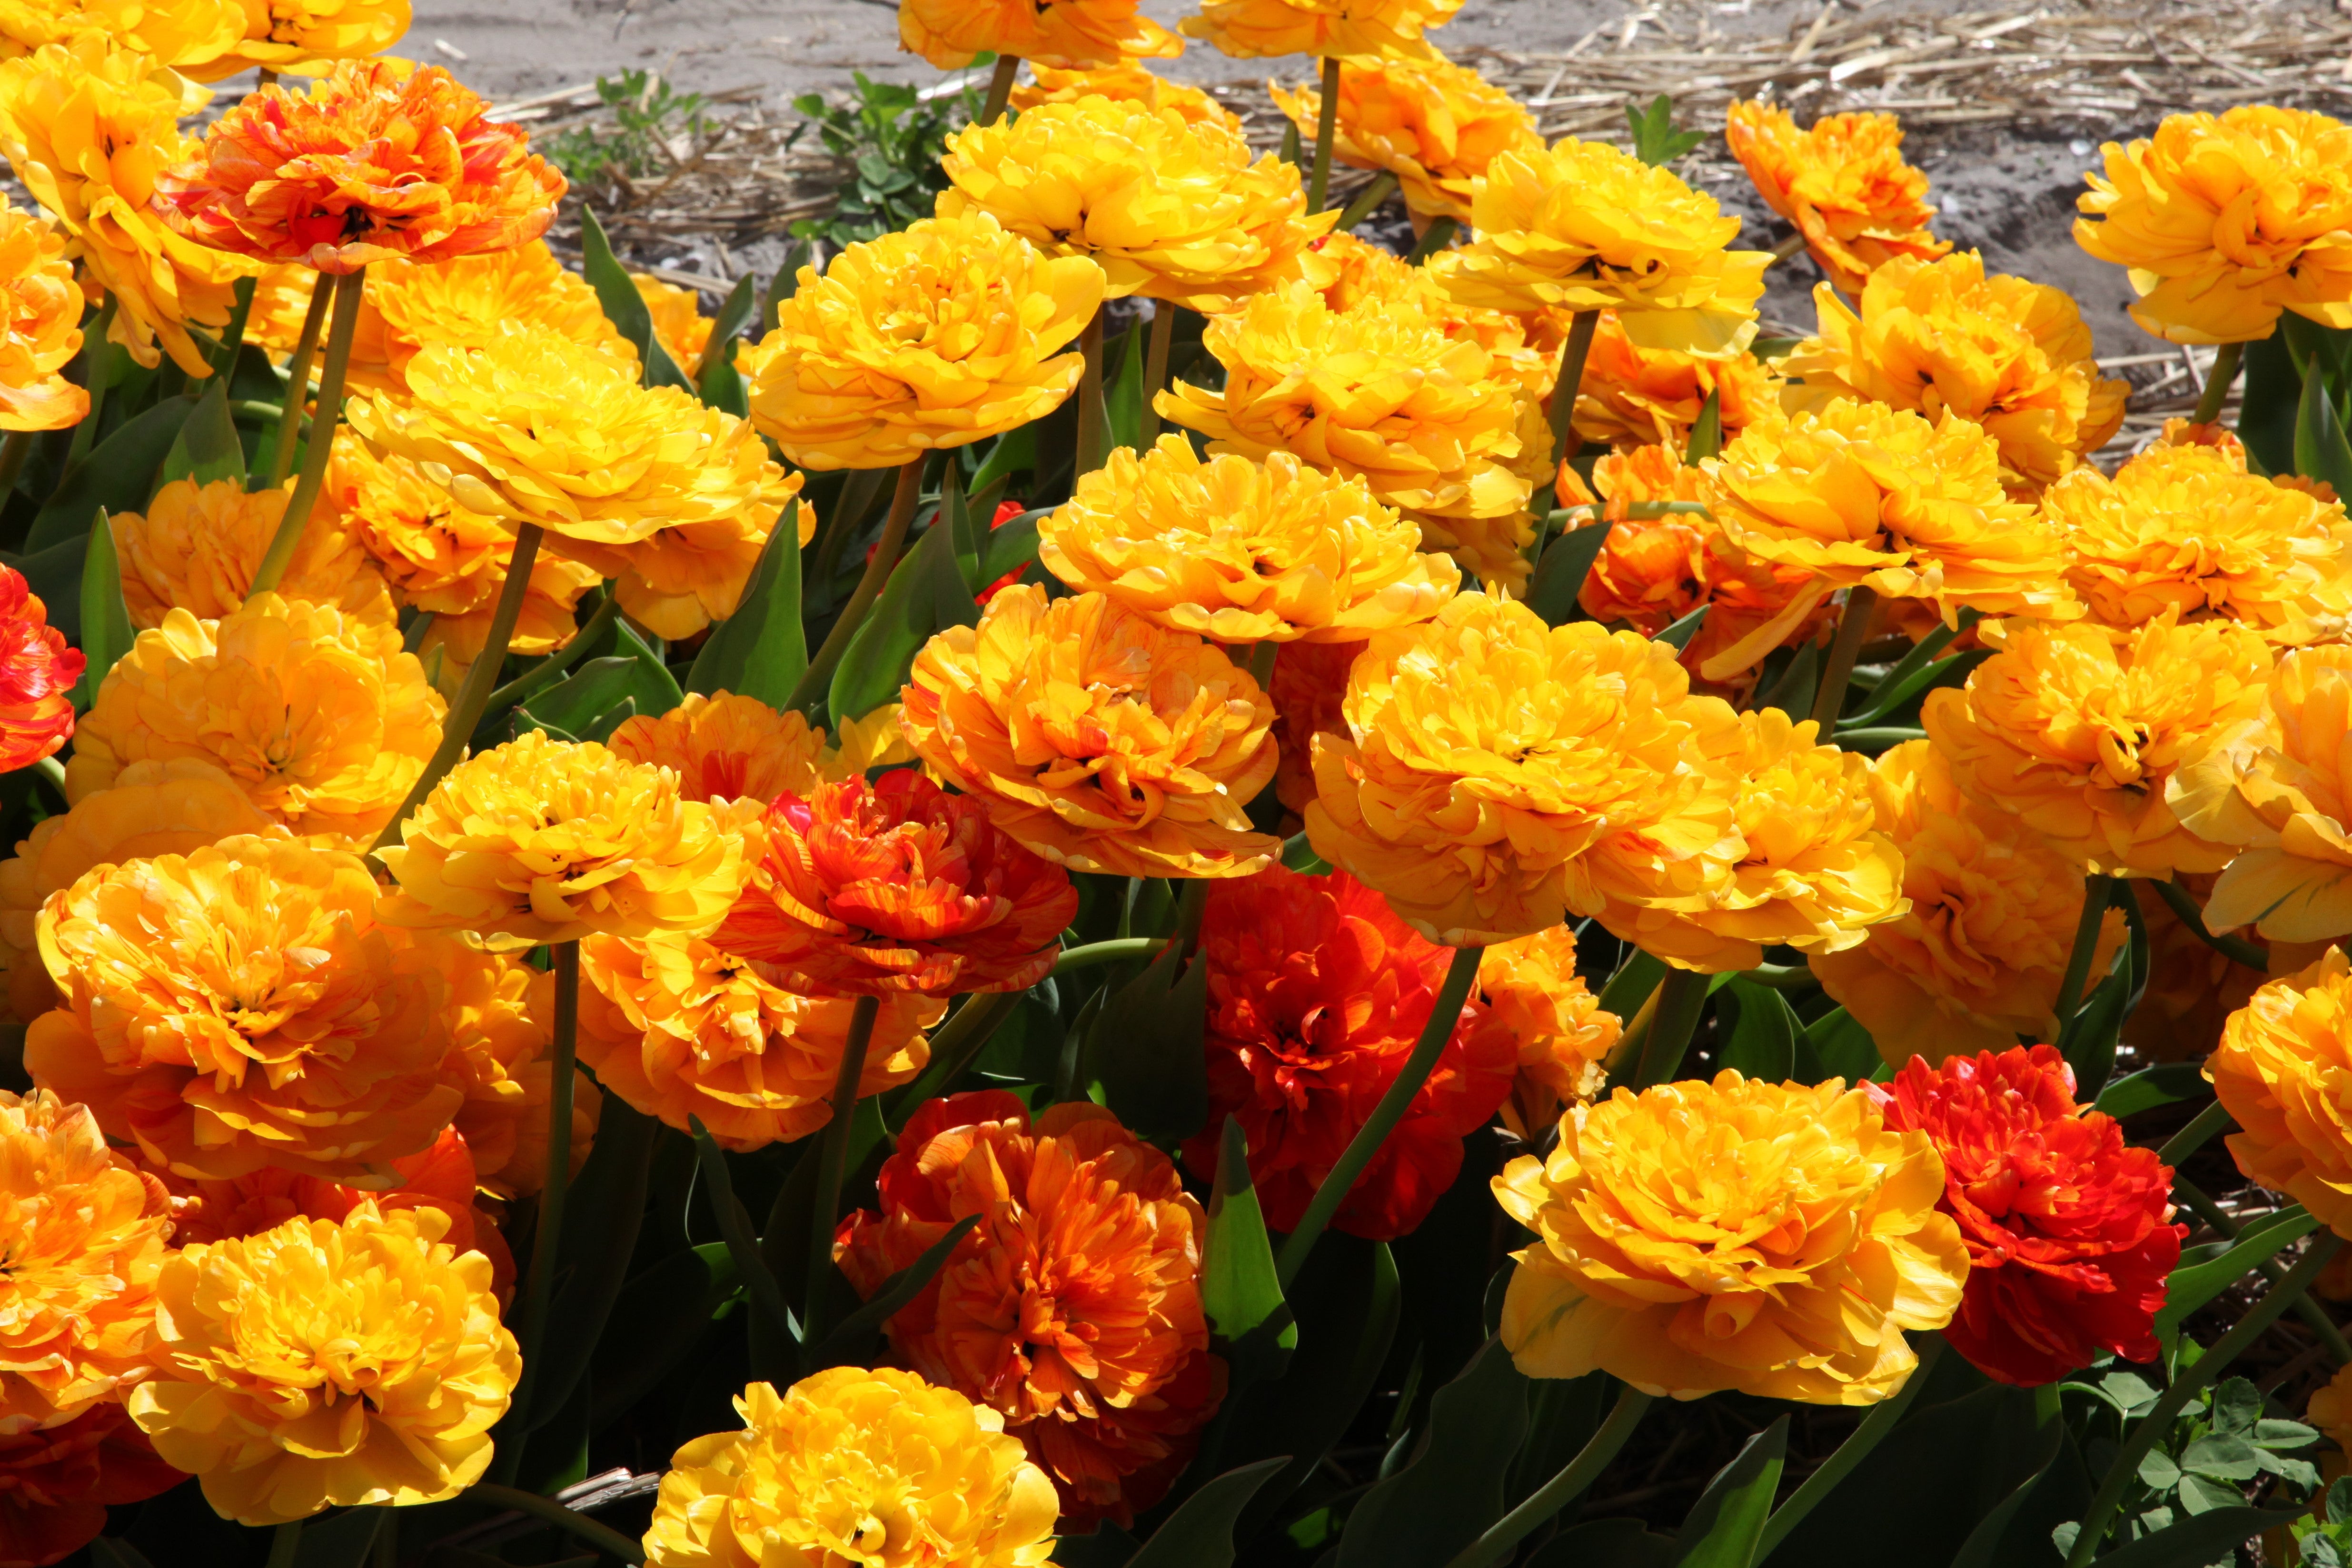 Sunlover, a double late tulip displaying a red and yellow color palette